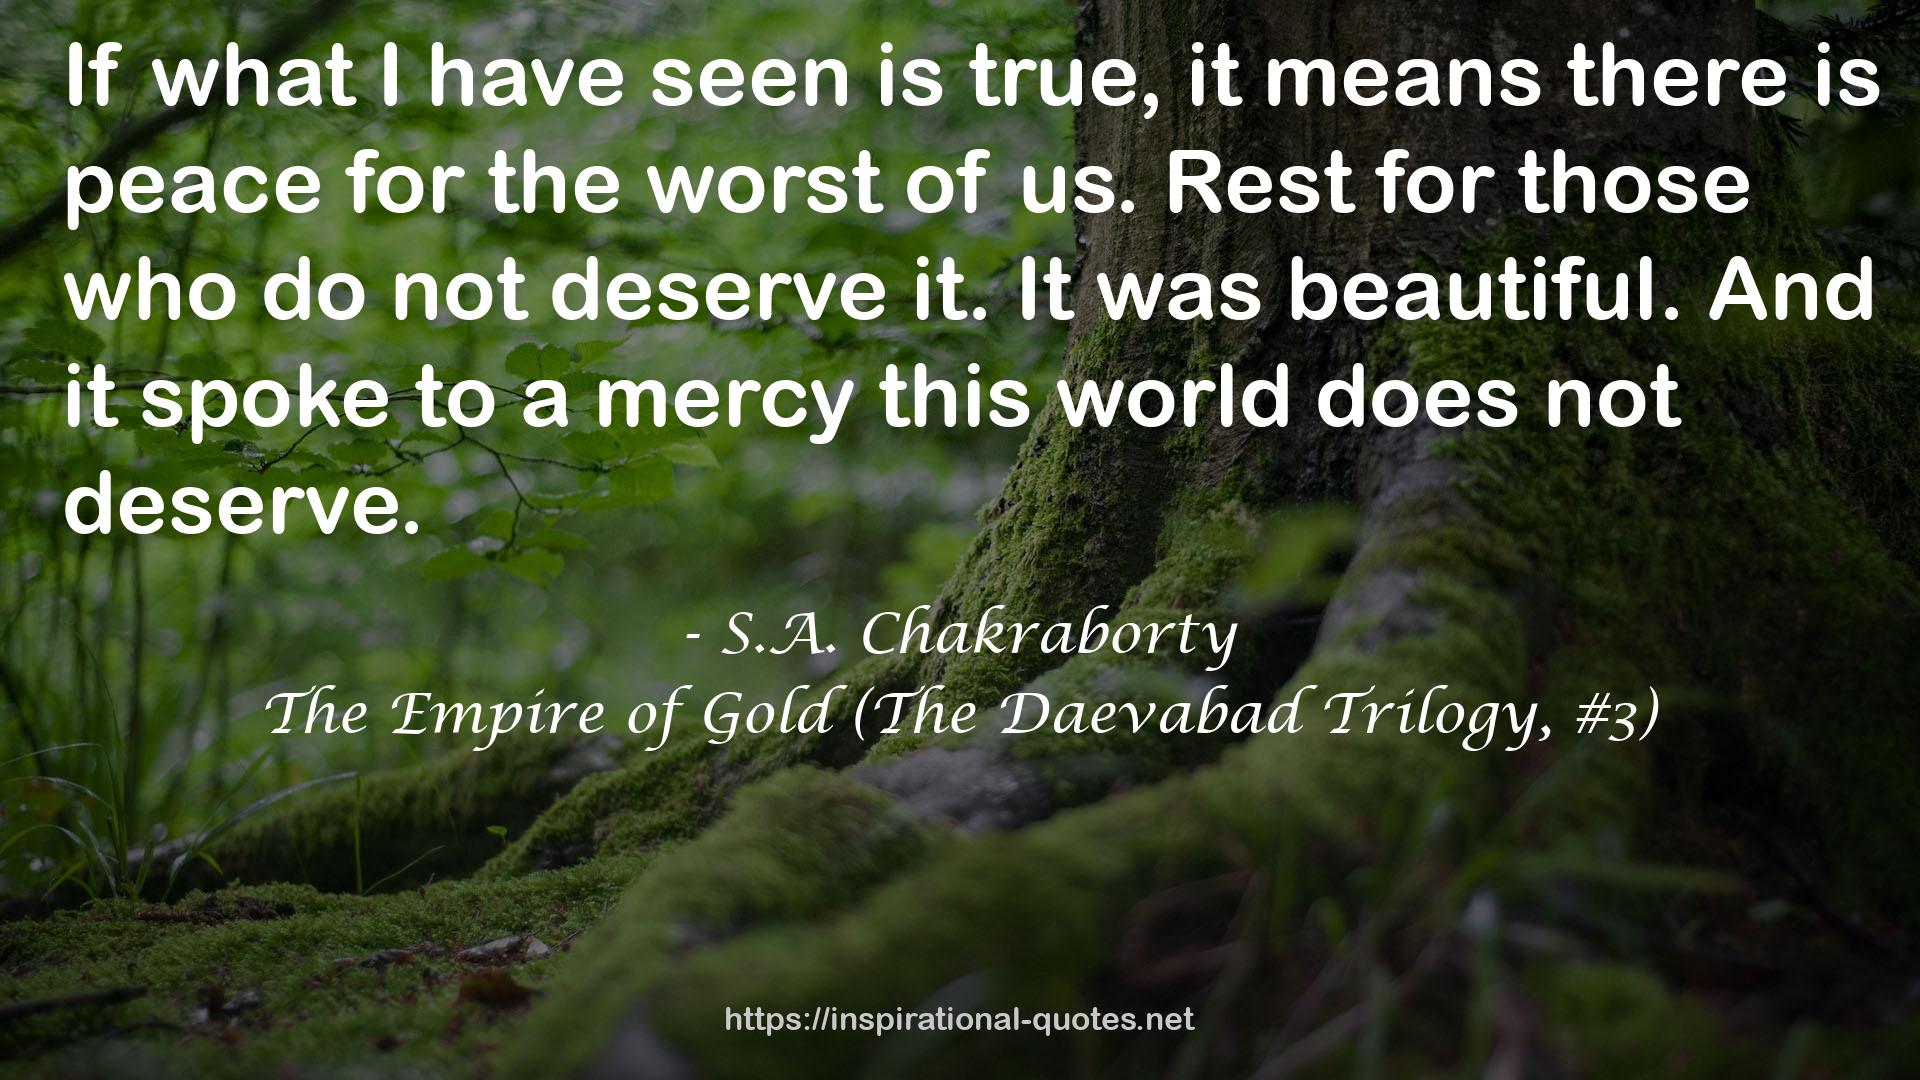 The Empire of Gold (The Daevabad Trilogy, #3) QUOTES